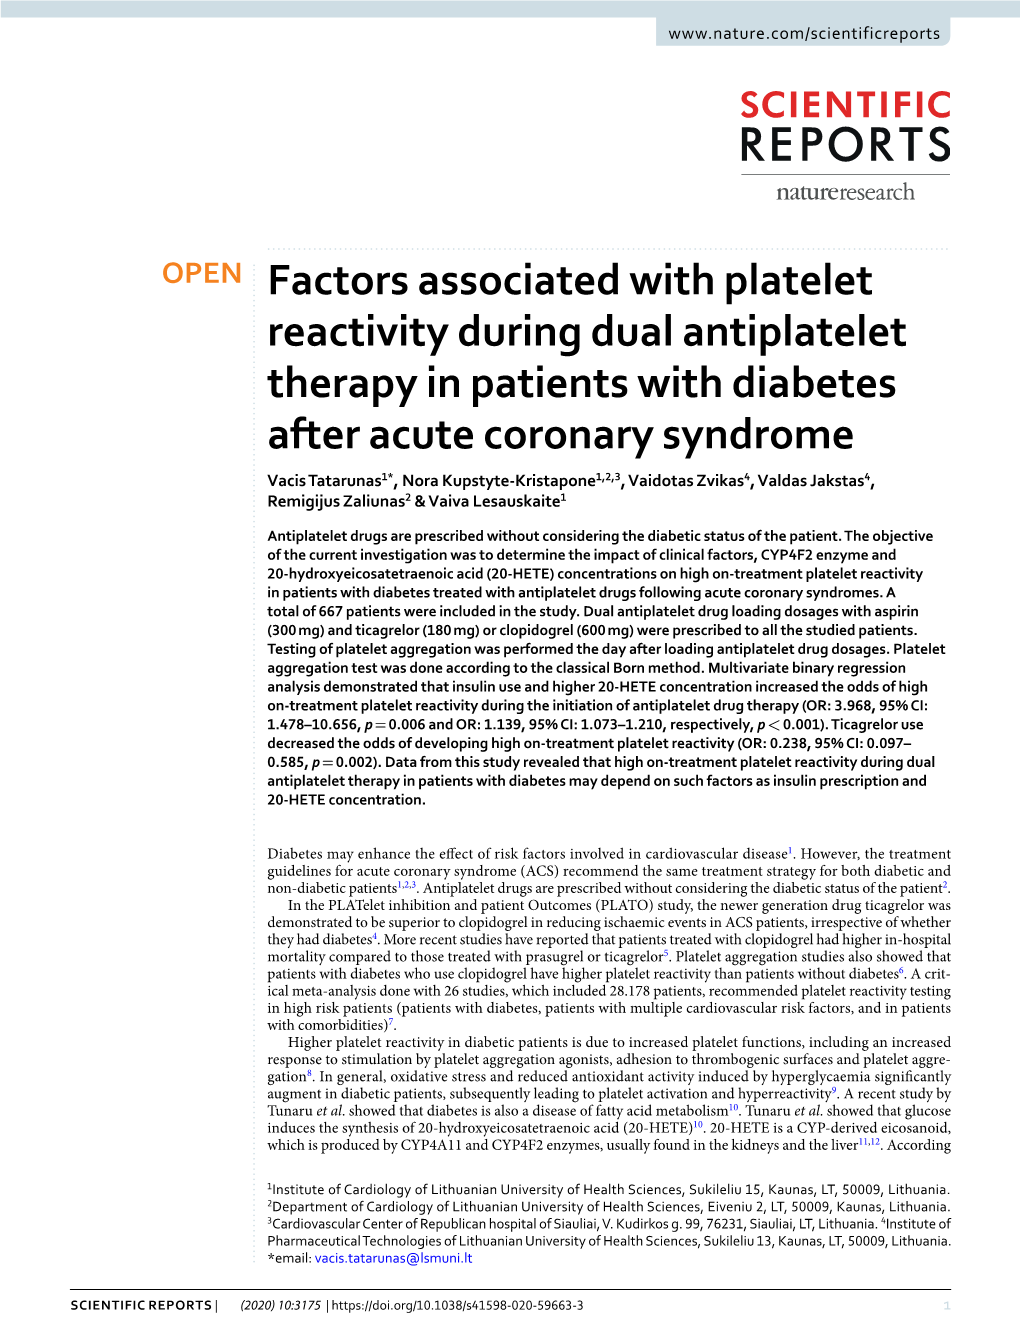 Factors Associated with Platelet Reactivity During Dual Antiplatelet